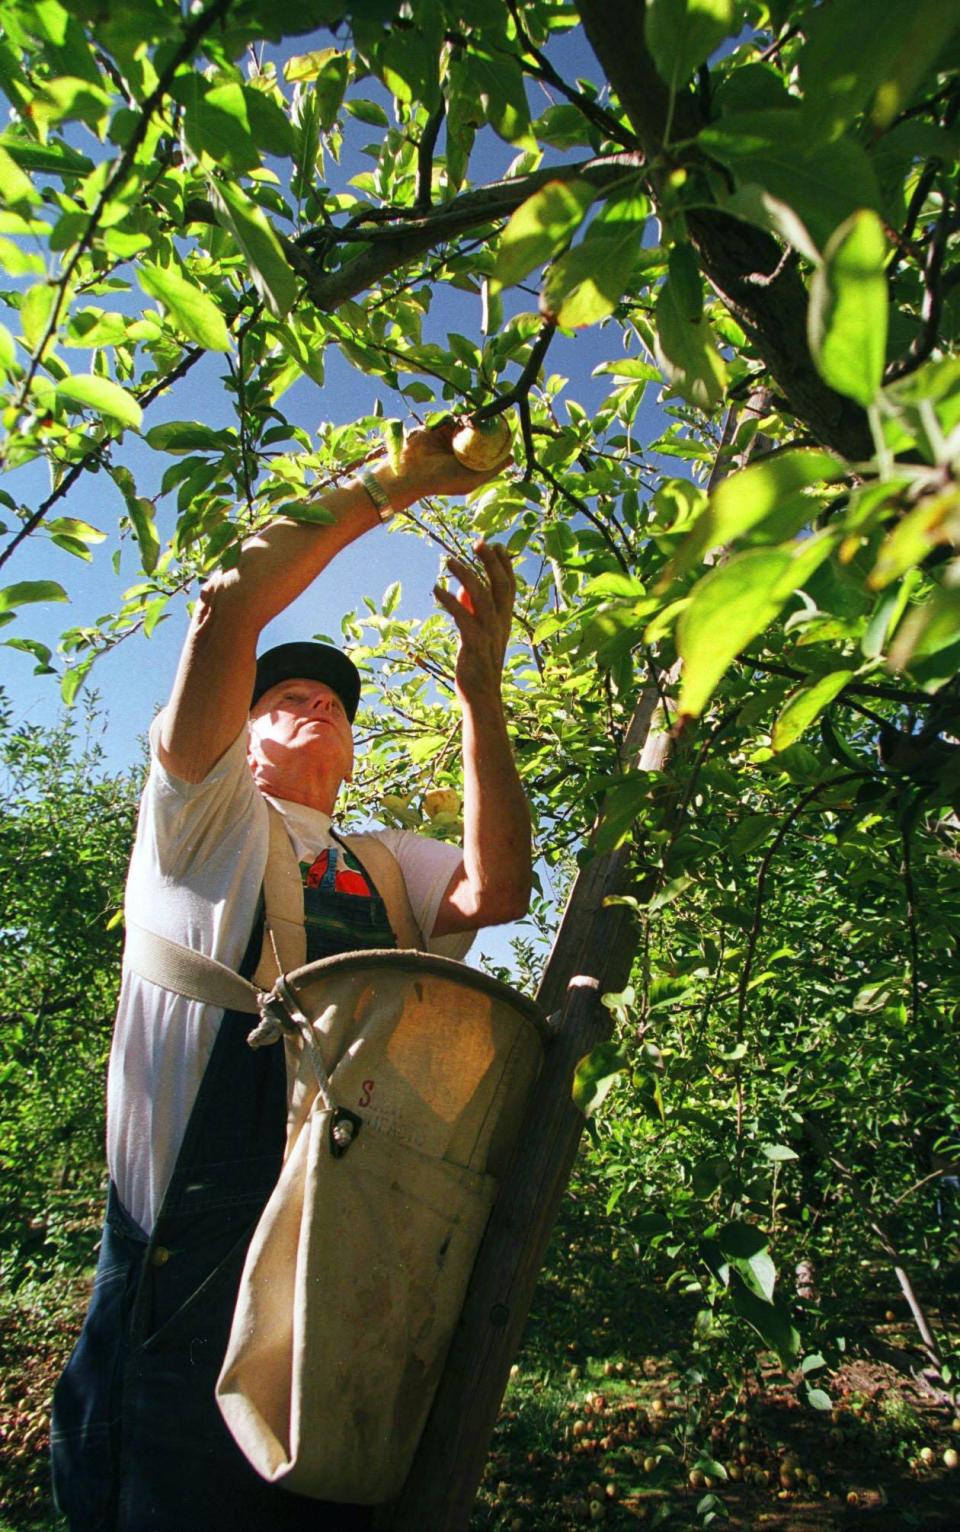 John Sharpe picks apples from one of the 750 apple trees at Breeden's Apple Orchard in Mt. Juliet Oct. 18, 1999. The season is waning, but there are still Yellow Delicious apples to pick.